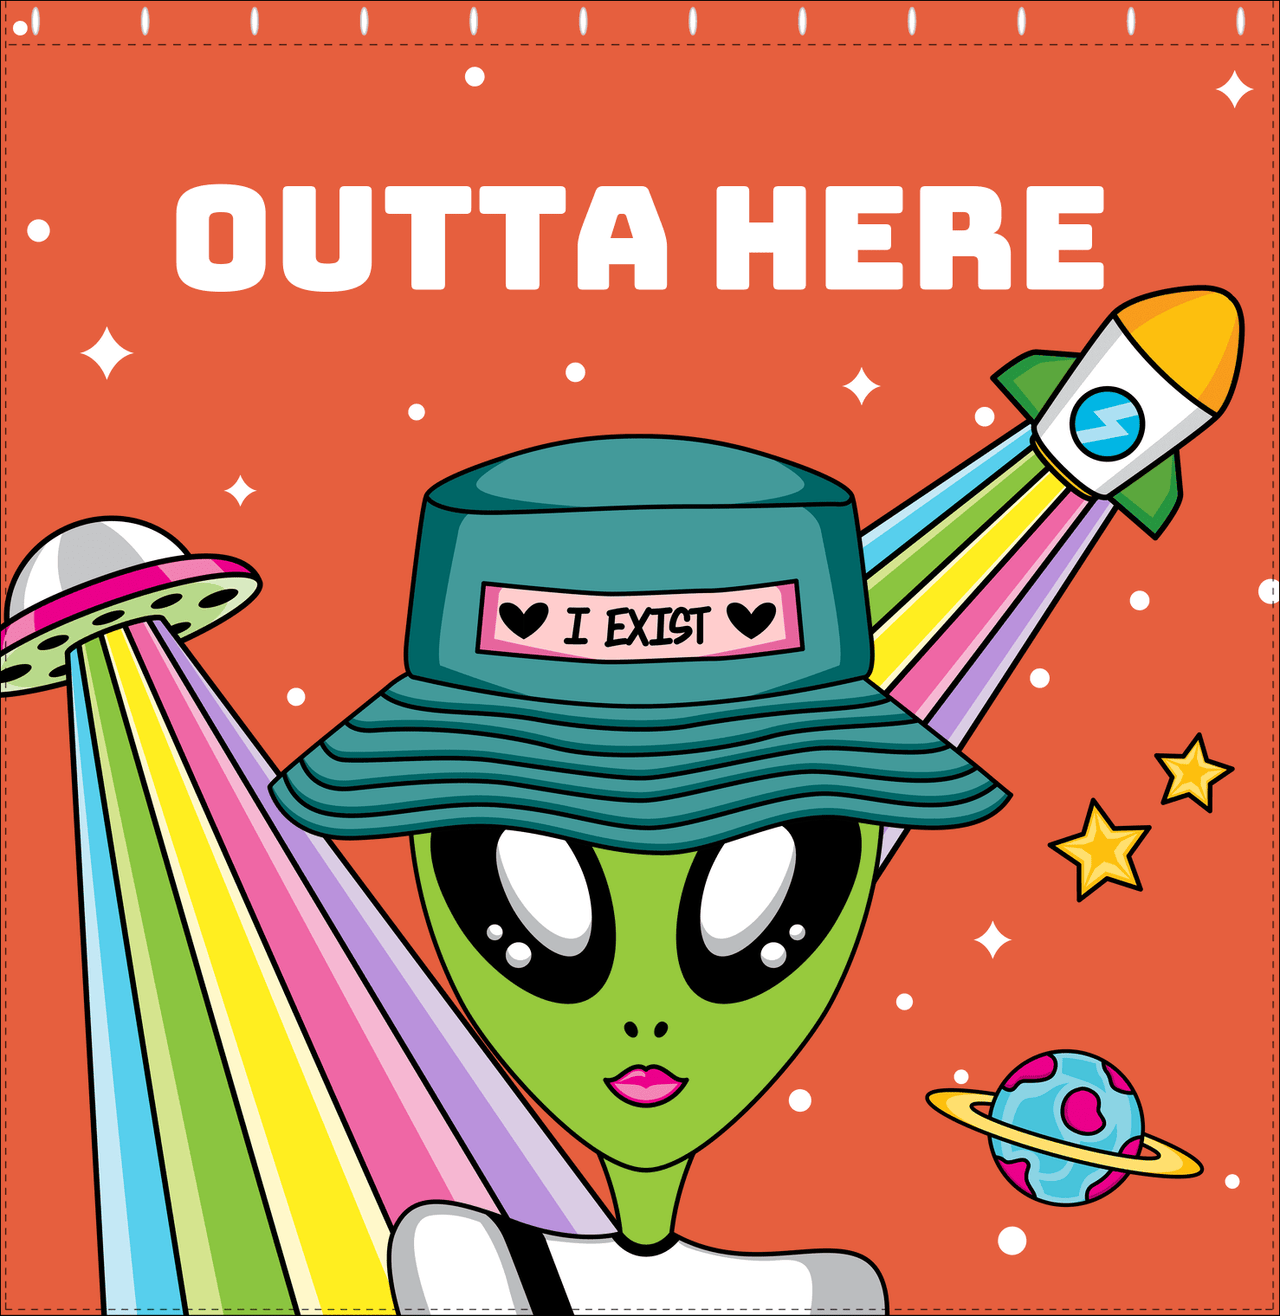 Personalized Aliens / UFO Shower Curtain - Outta Here - Decorate View